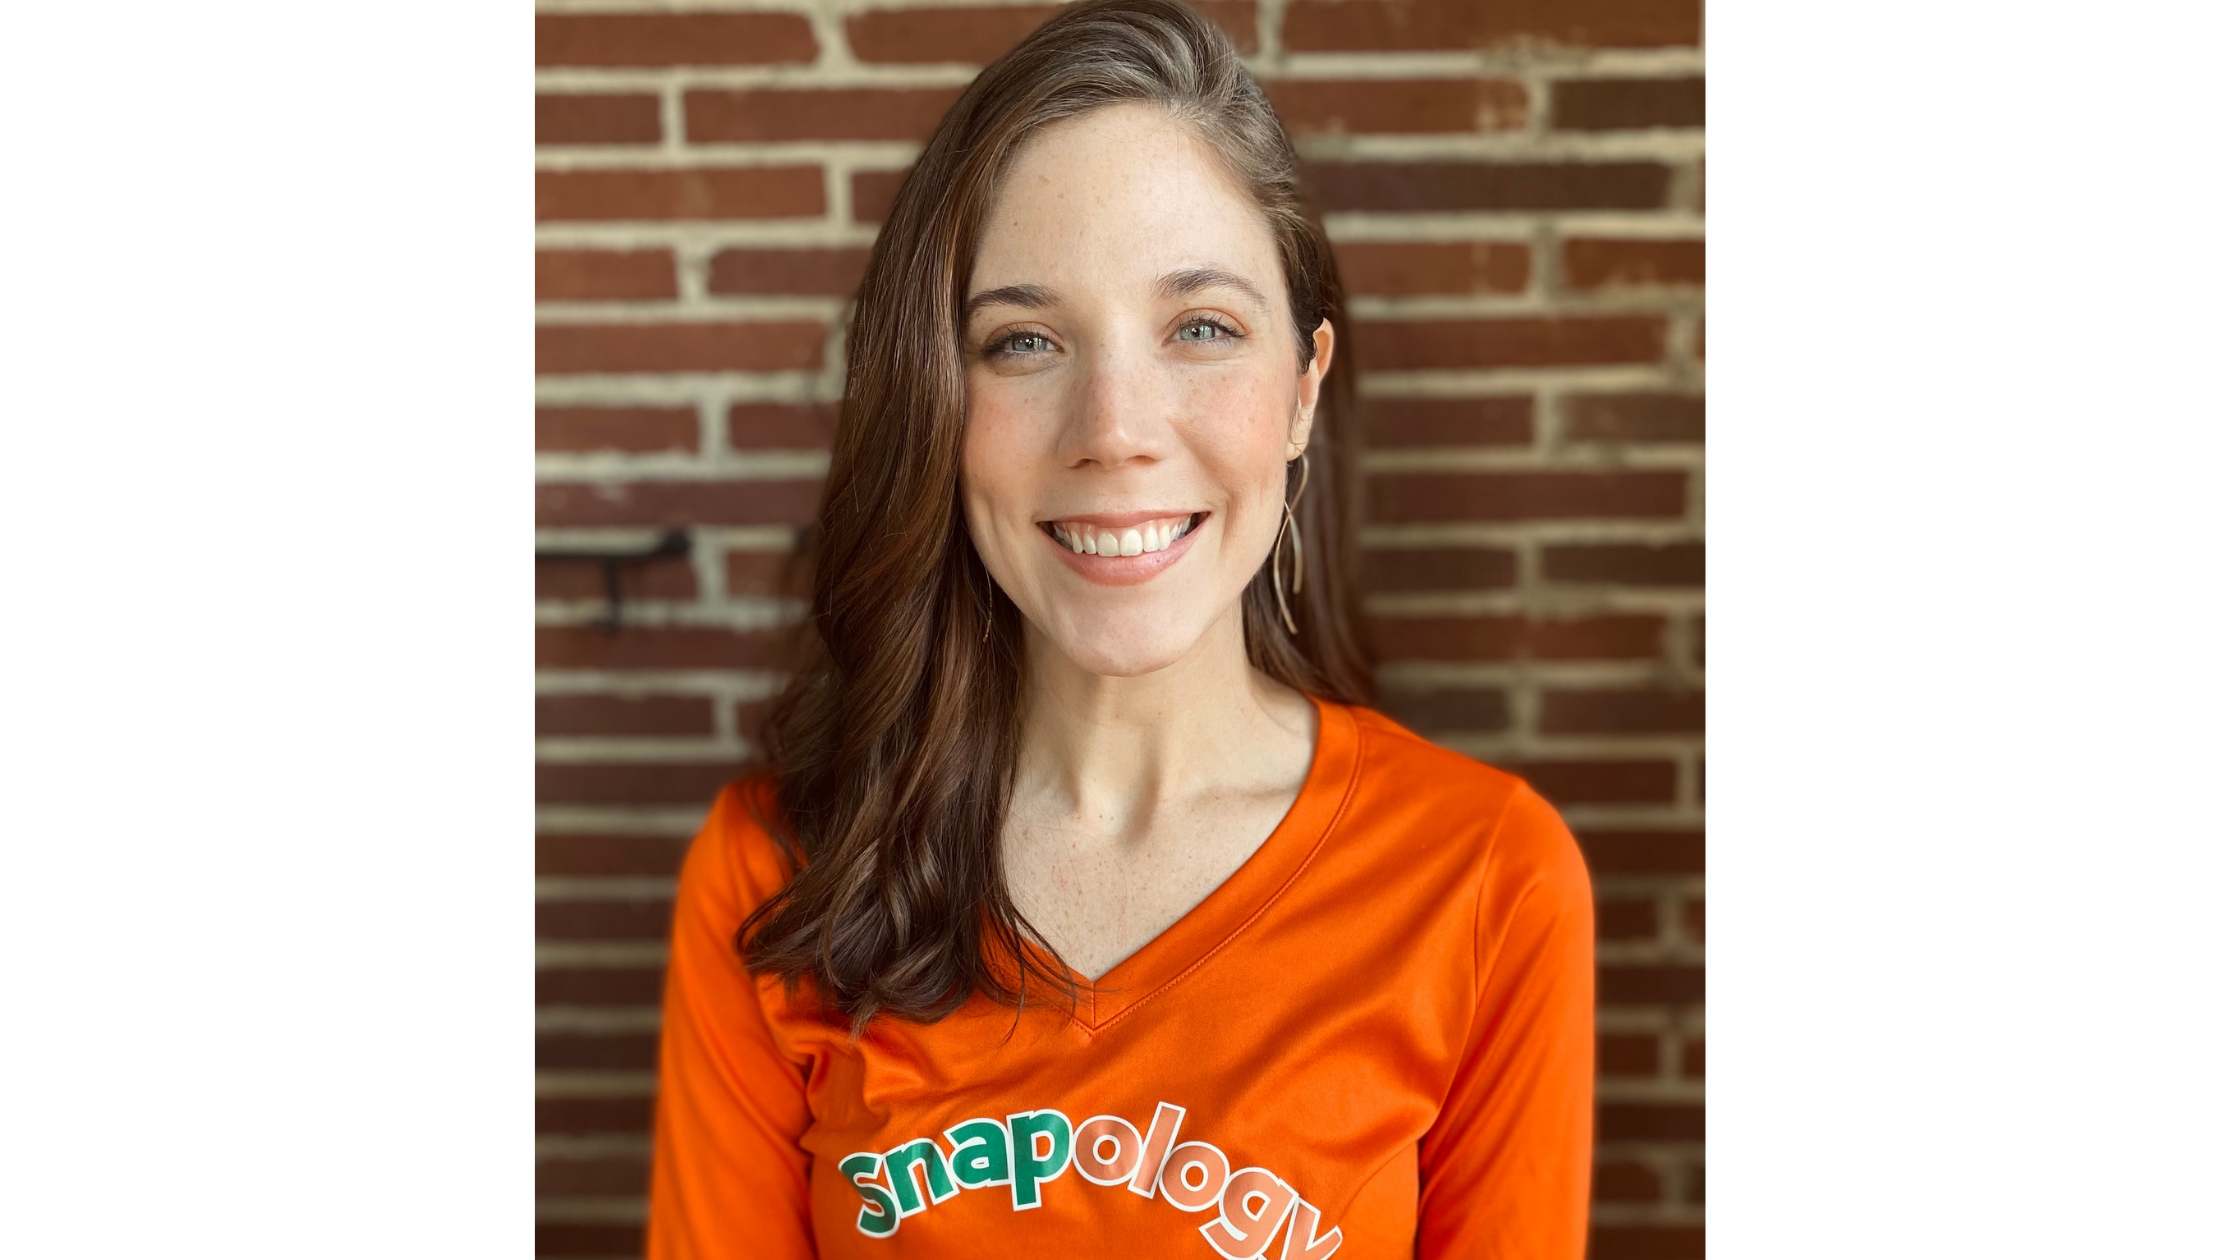 Snapology facilatator smiling, while wearing branded shirt